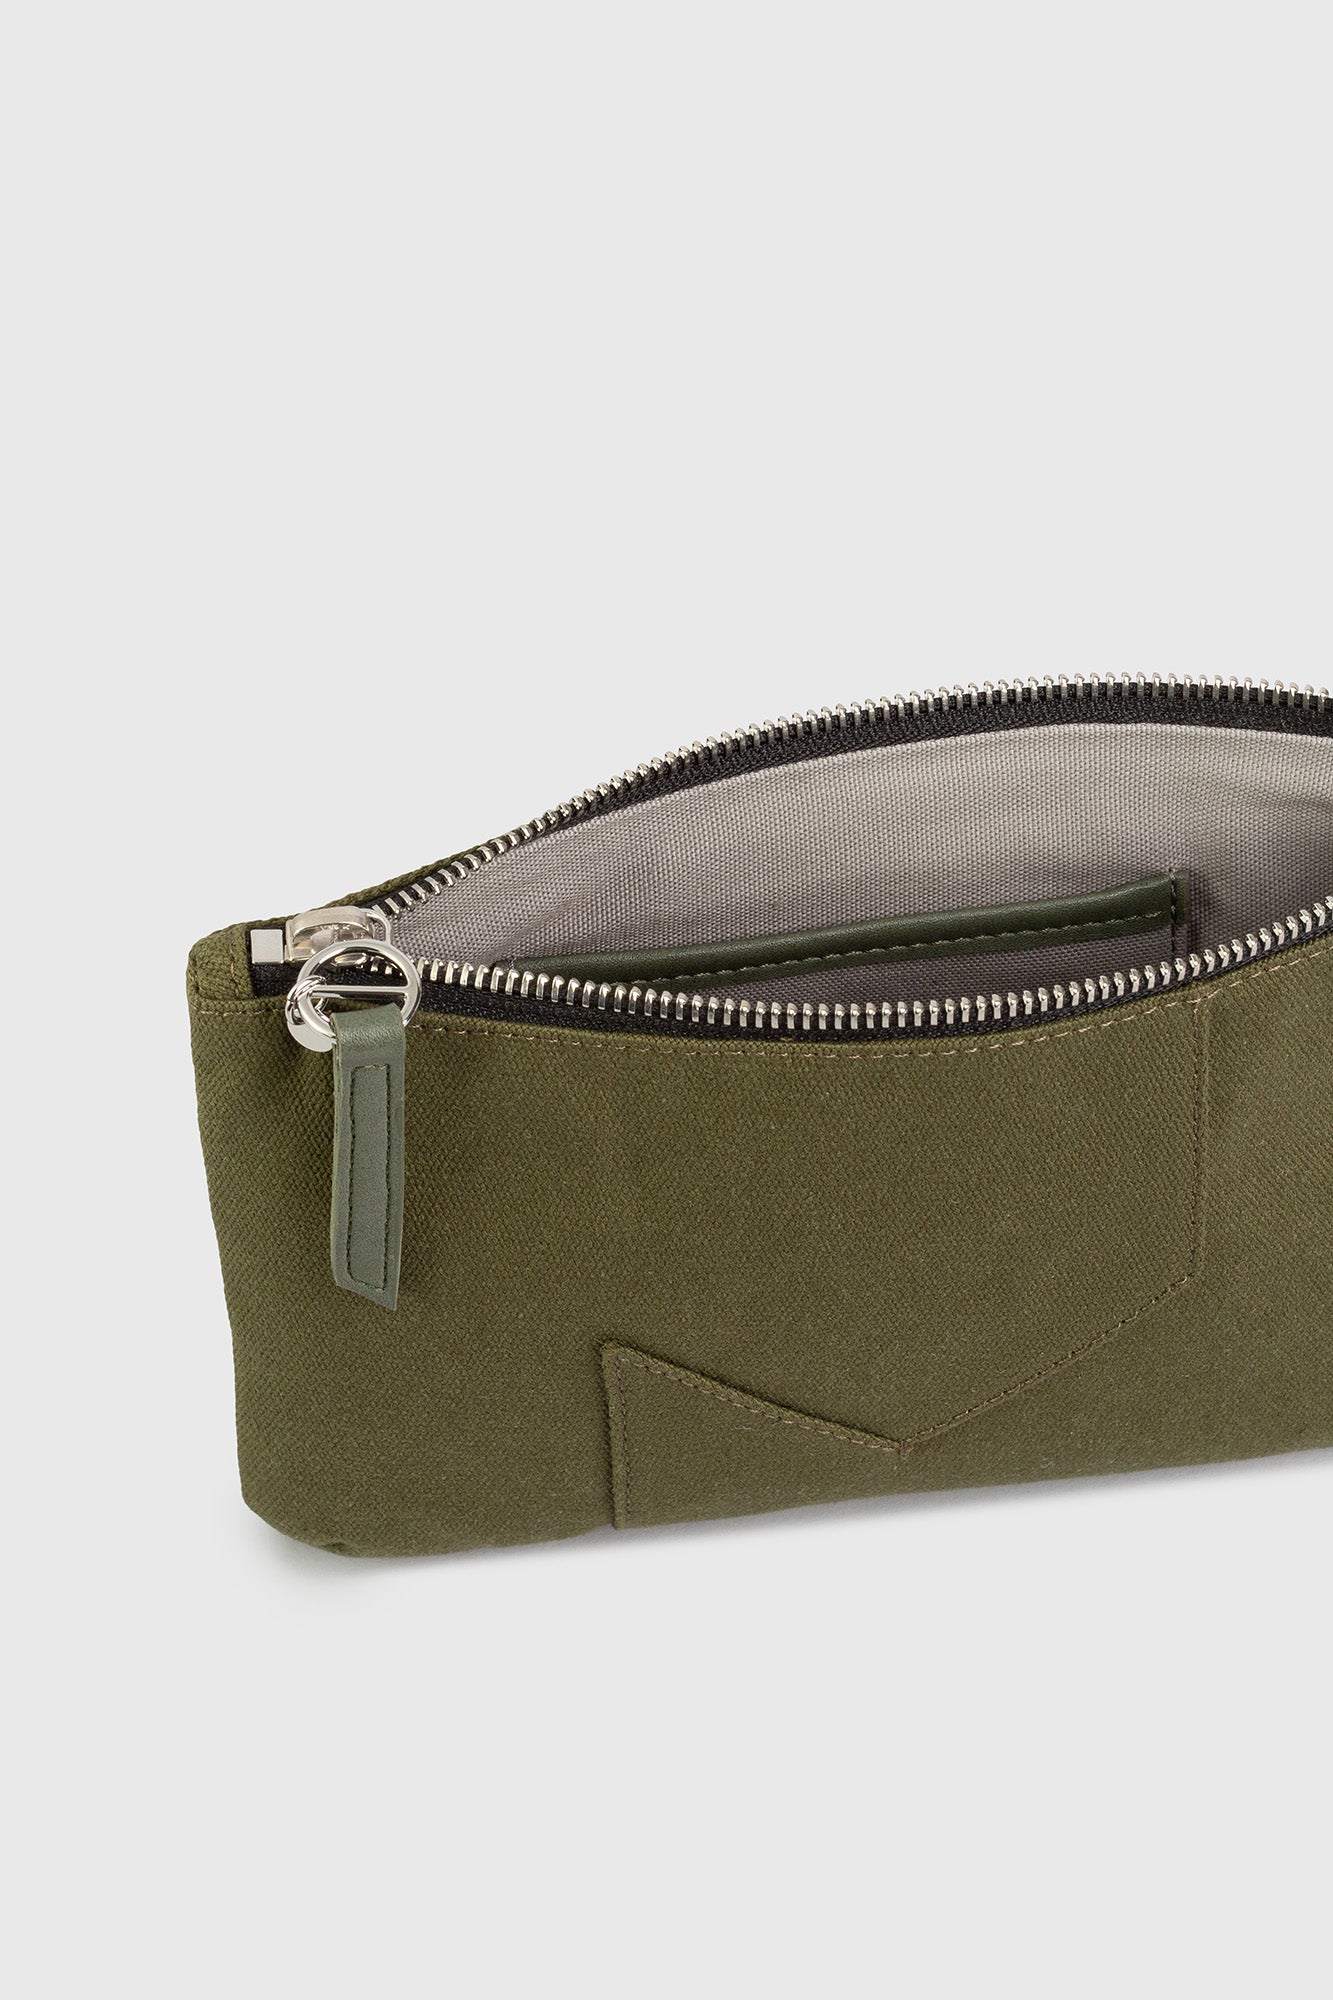 Diaper Clutch in Olive Green - no Embroidery – ROSA MAE BABY ESSENTIALS